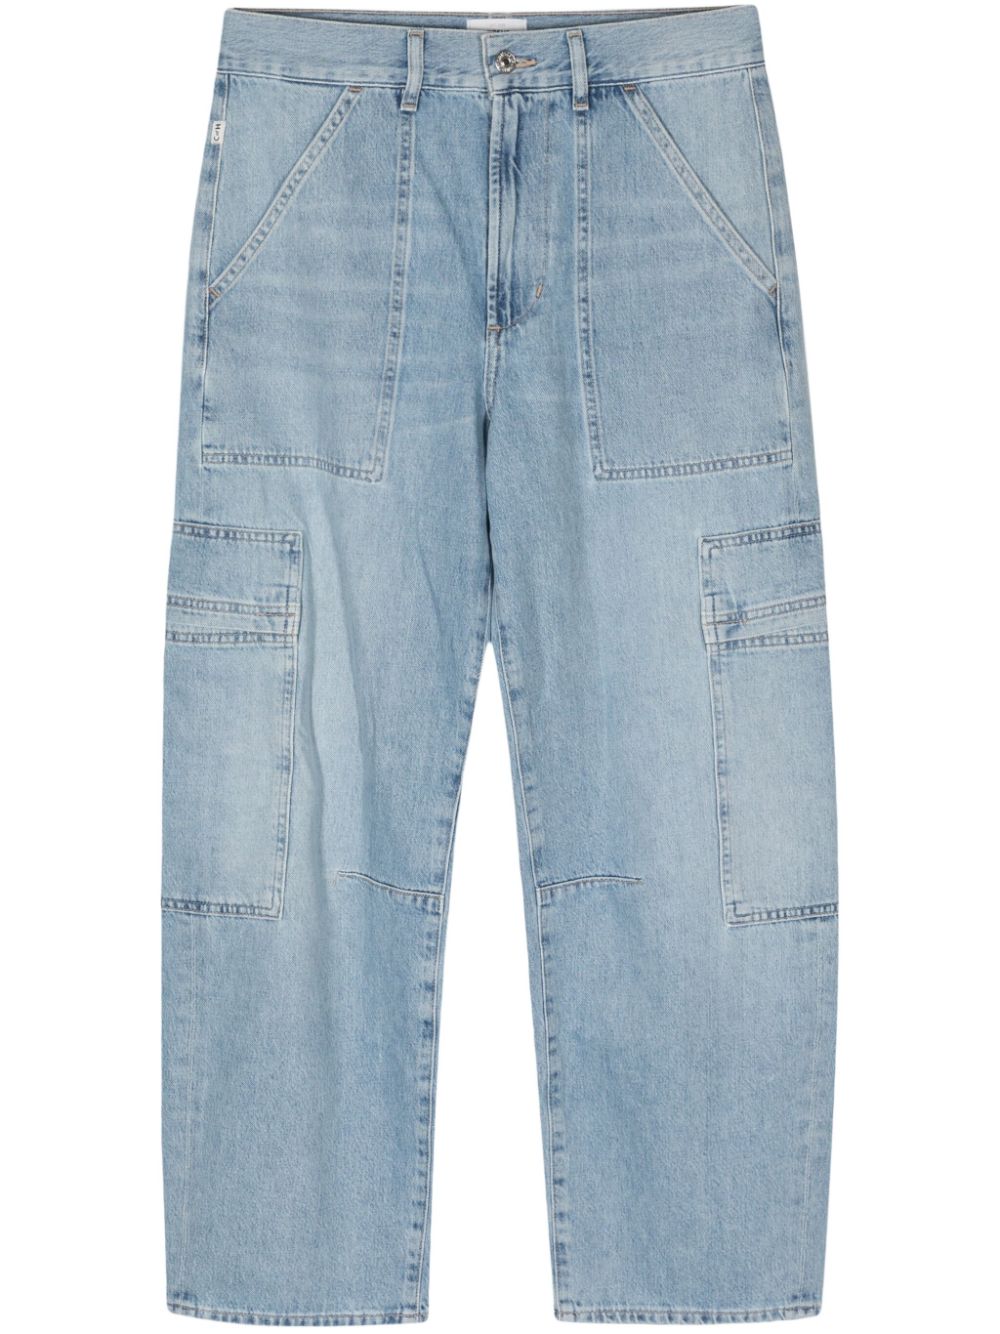 Citizens of Humanity low-rise cargo jeans - Blue von Citizens of Humanity